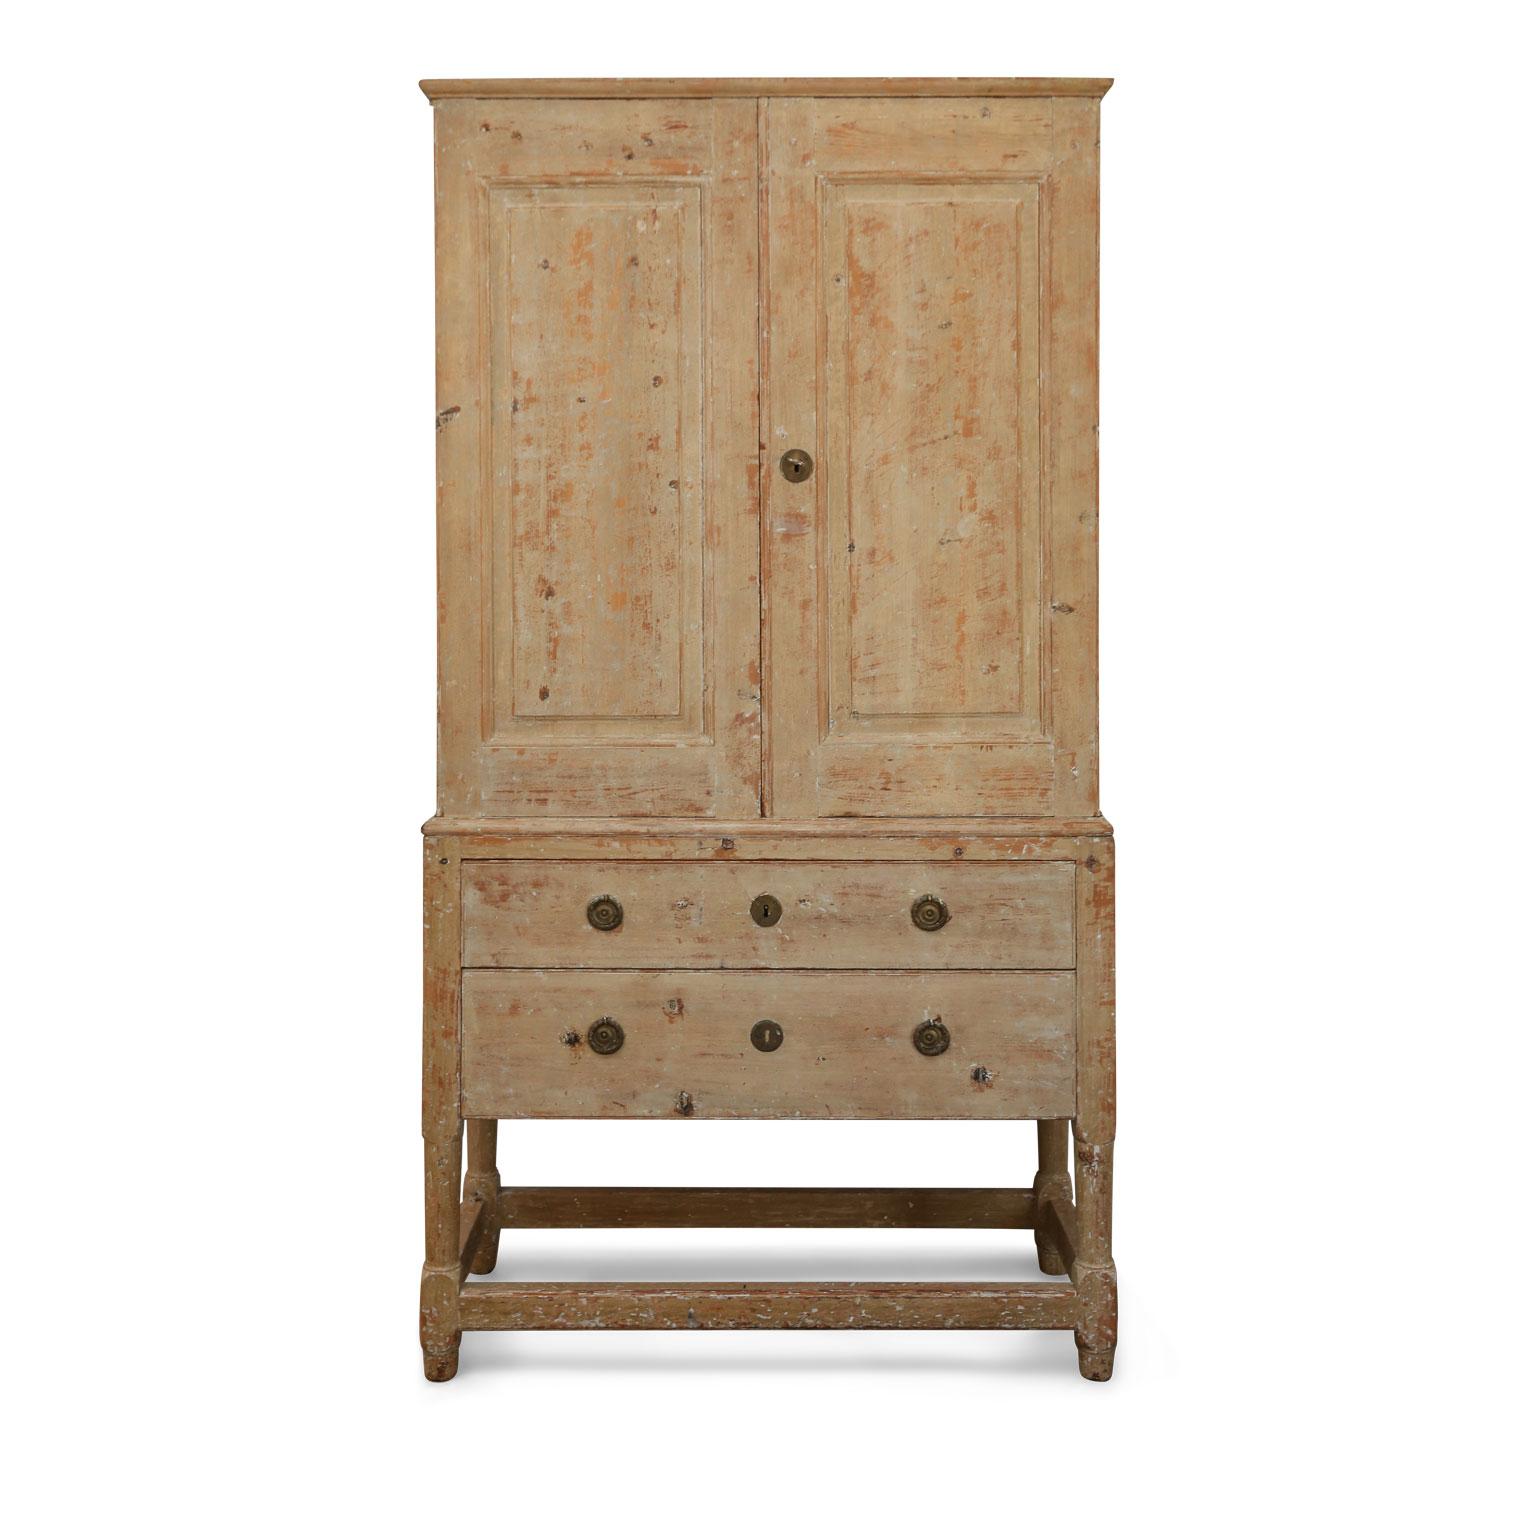 Swedish pine tall cabinet: early 19th century transitional hand-carved cabinet-on-chest raised on turned legs. Upper two-door cabinet holds multiple open compartments for storage. Lower chest contains two full-width drawers.